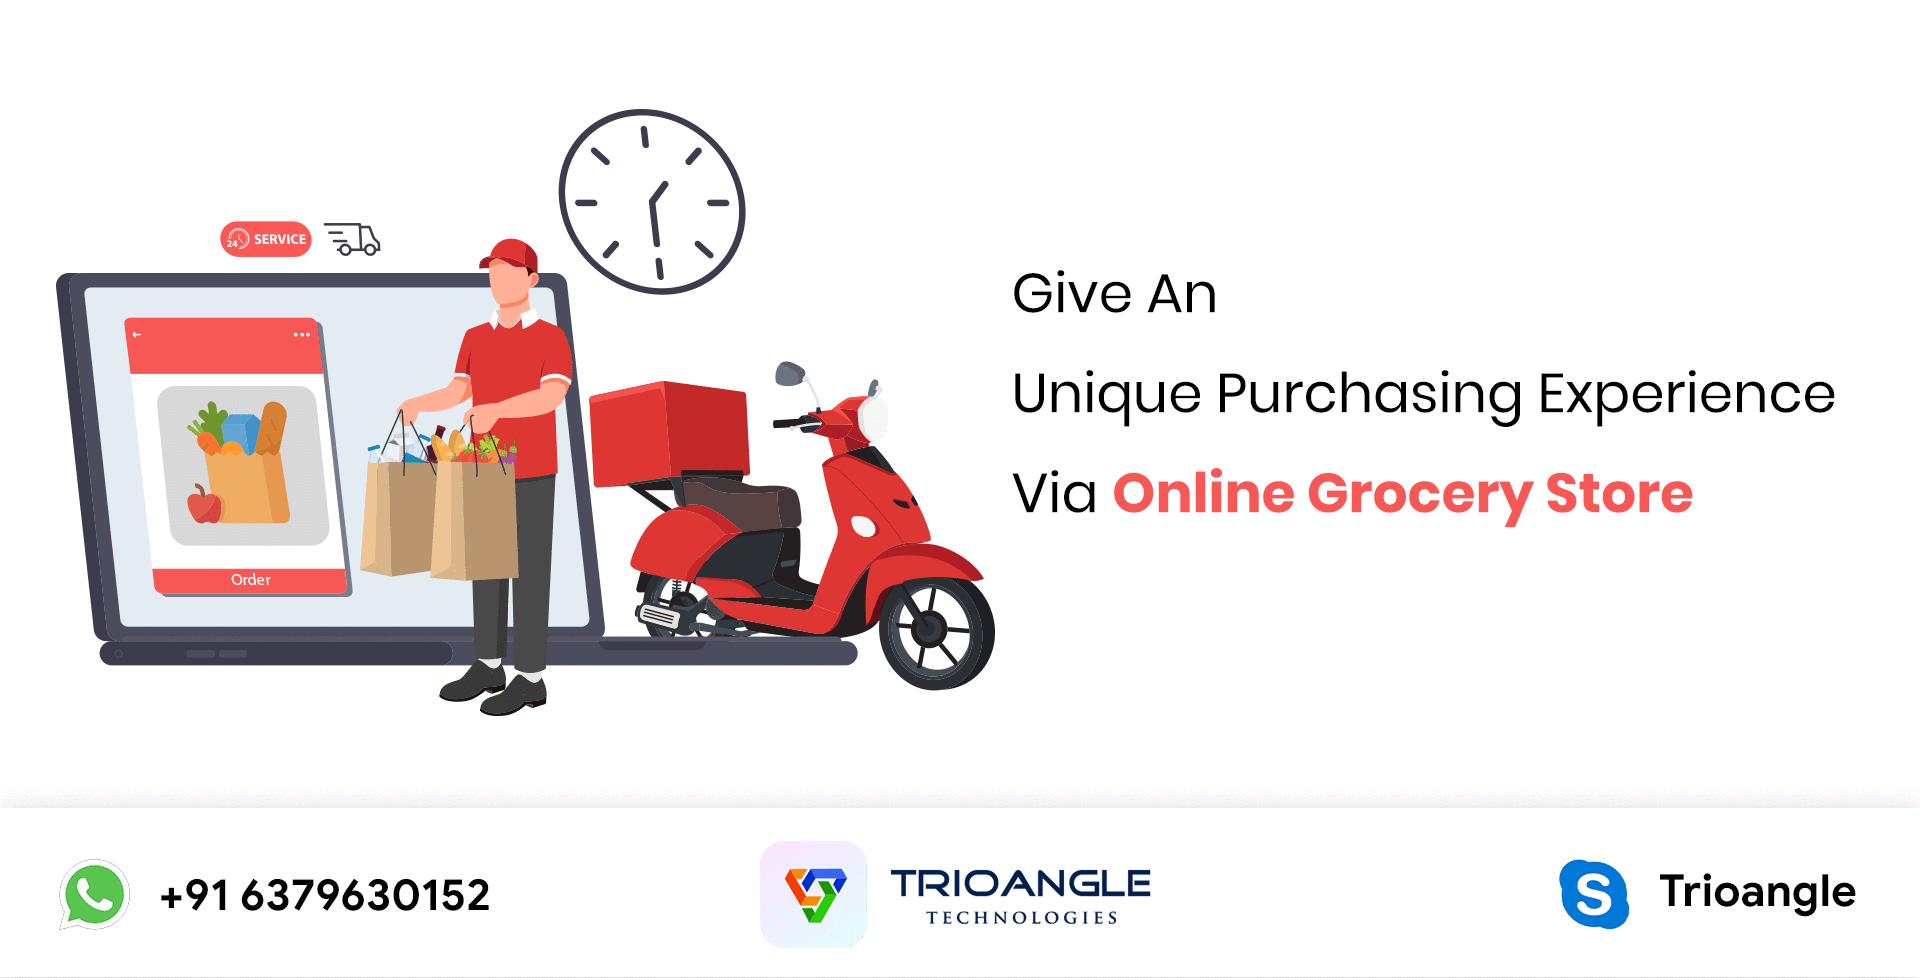 Give An Unique Purchasing Experience Via Online Grocery Store